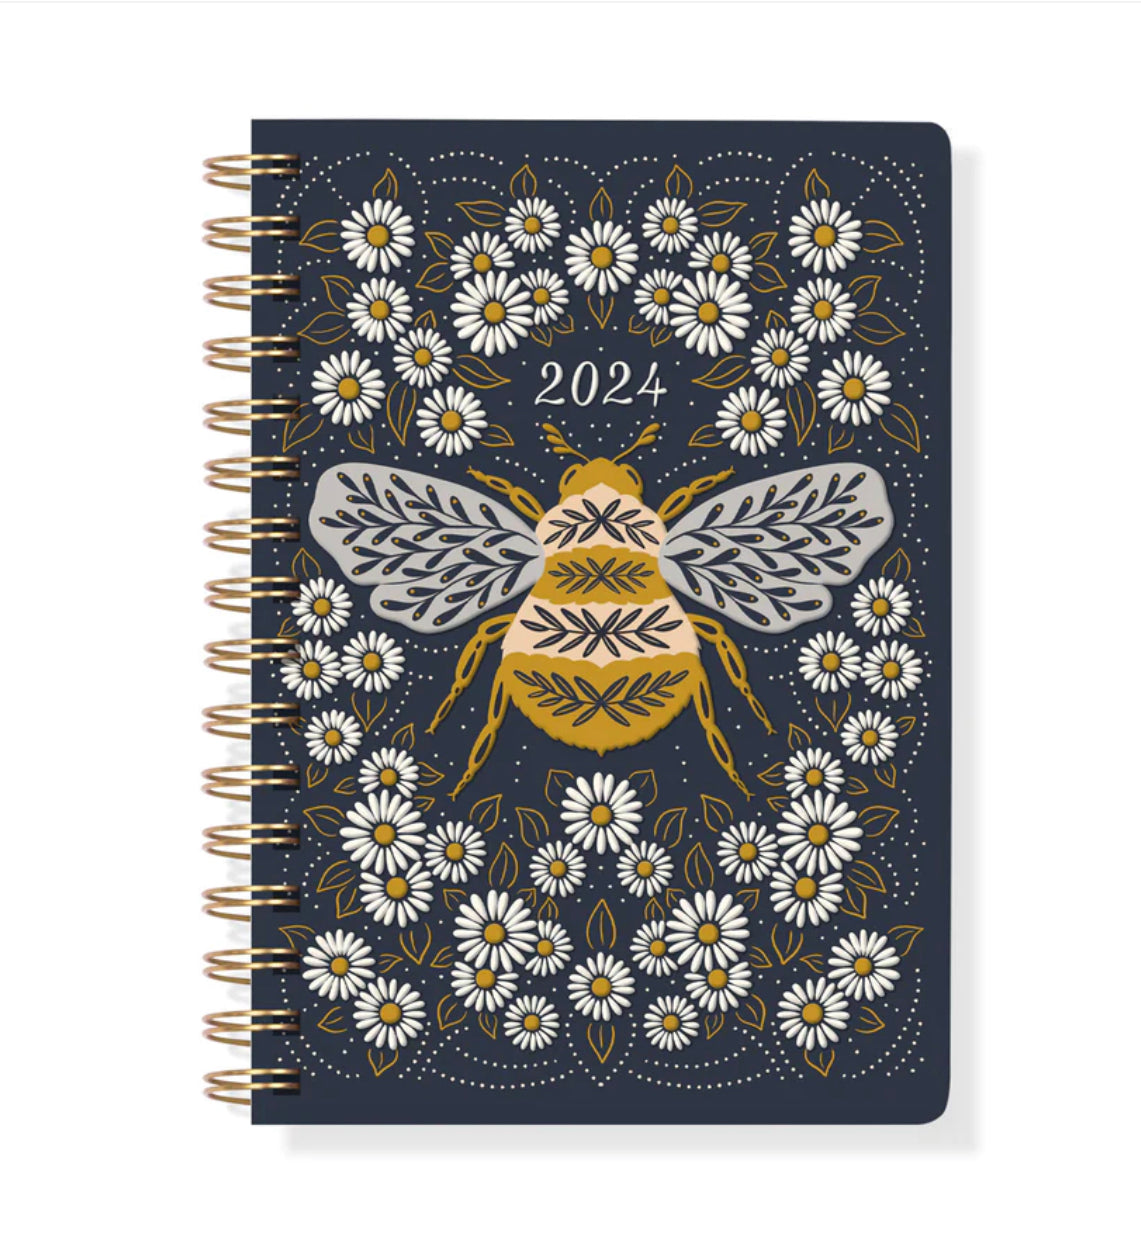 2024 Planner - Bumble Bees